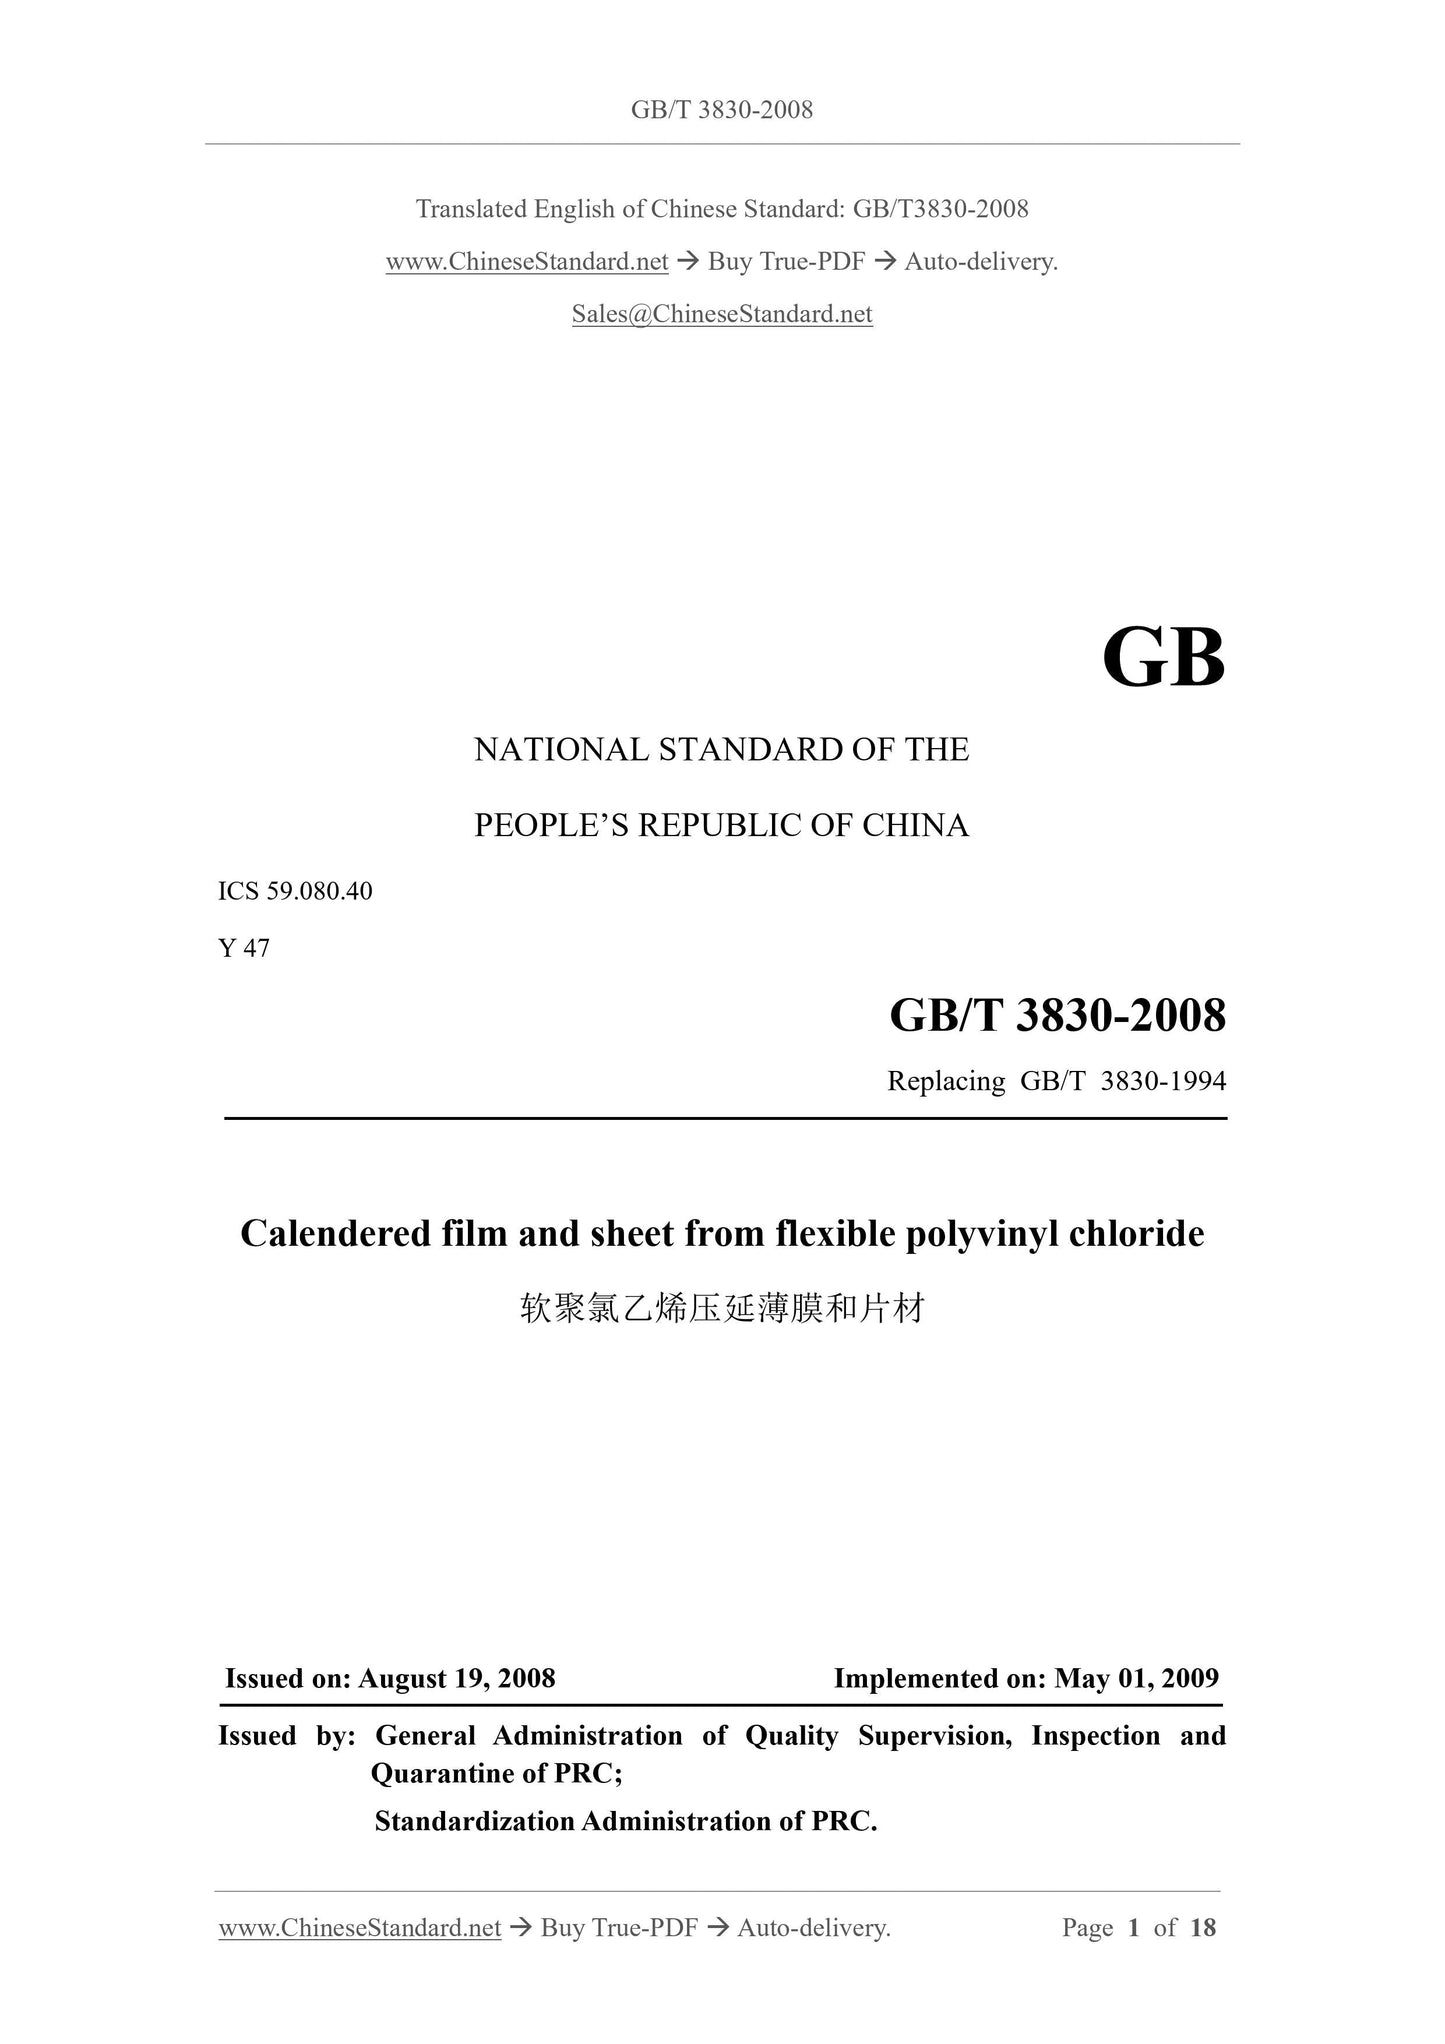 GB/T 3830-2008 Page 1